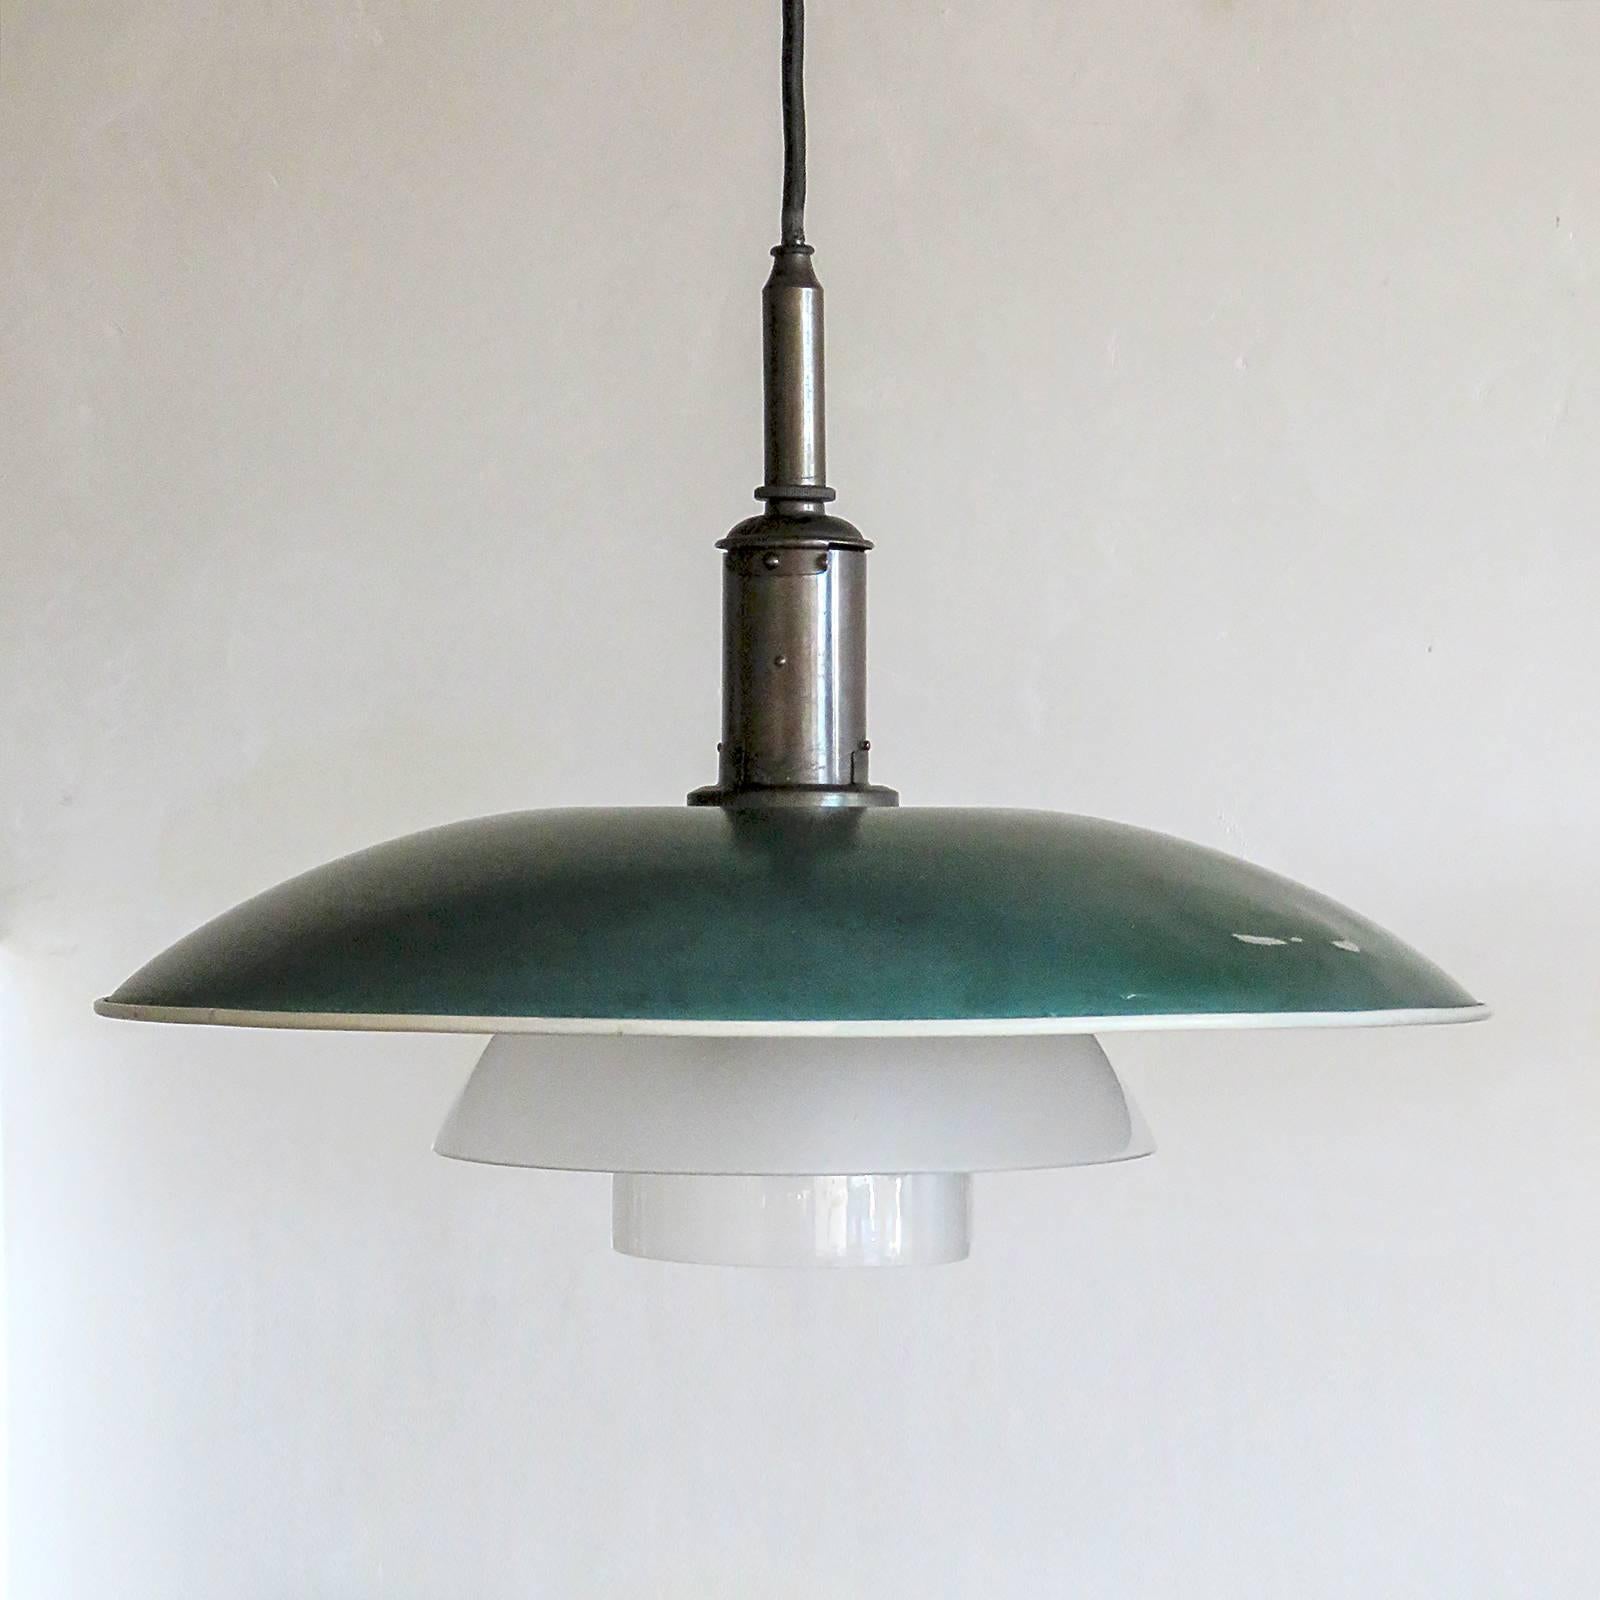 stunning early 1930's PH 5/4 Pendant by Poul Henningsen for Louis Poulsen with green enameled metal top shade, center and bottom shade in frosted glass and diffuser in matte frosted glass, patinaed brass bayonet shade holder and patinaed brass